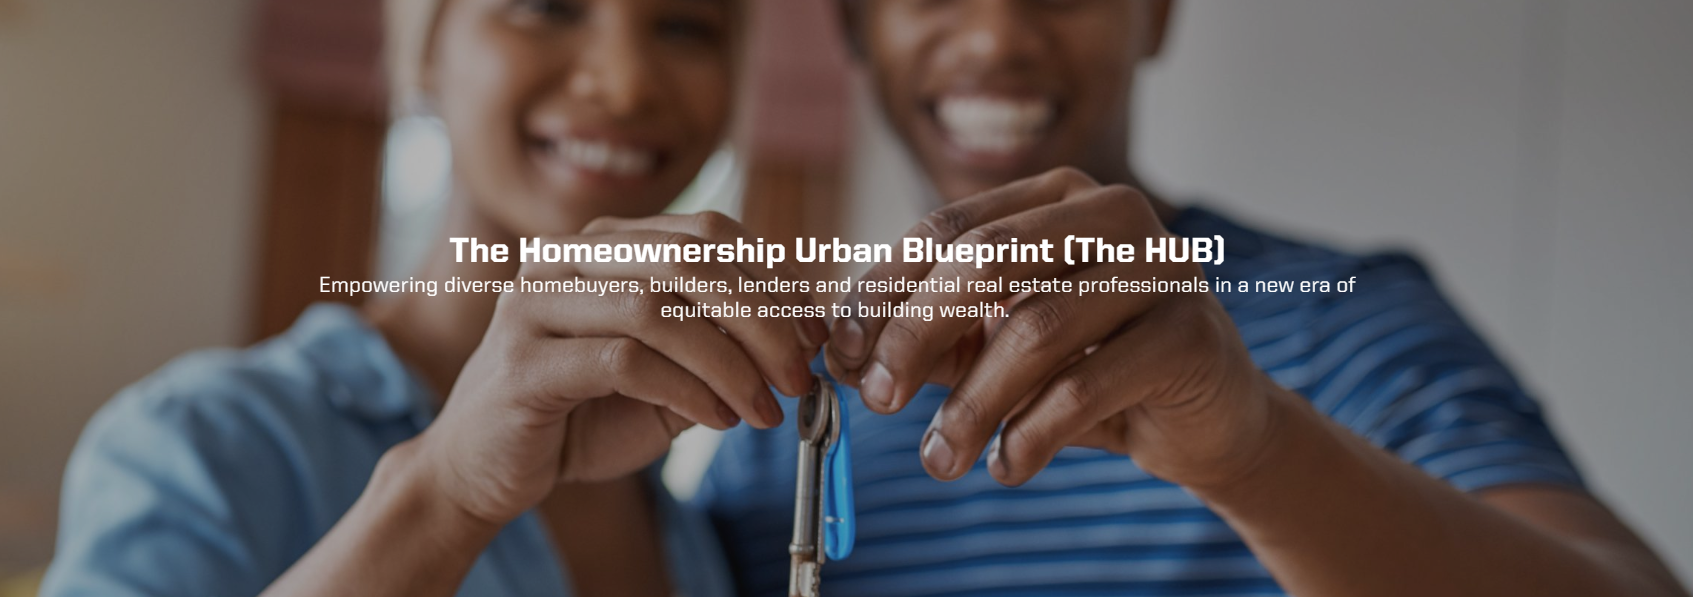 Featured image for “The Homeownership Urban Blueprint (HUB): Connecting the dots in the homebuying process”